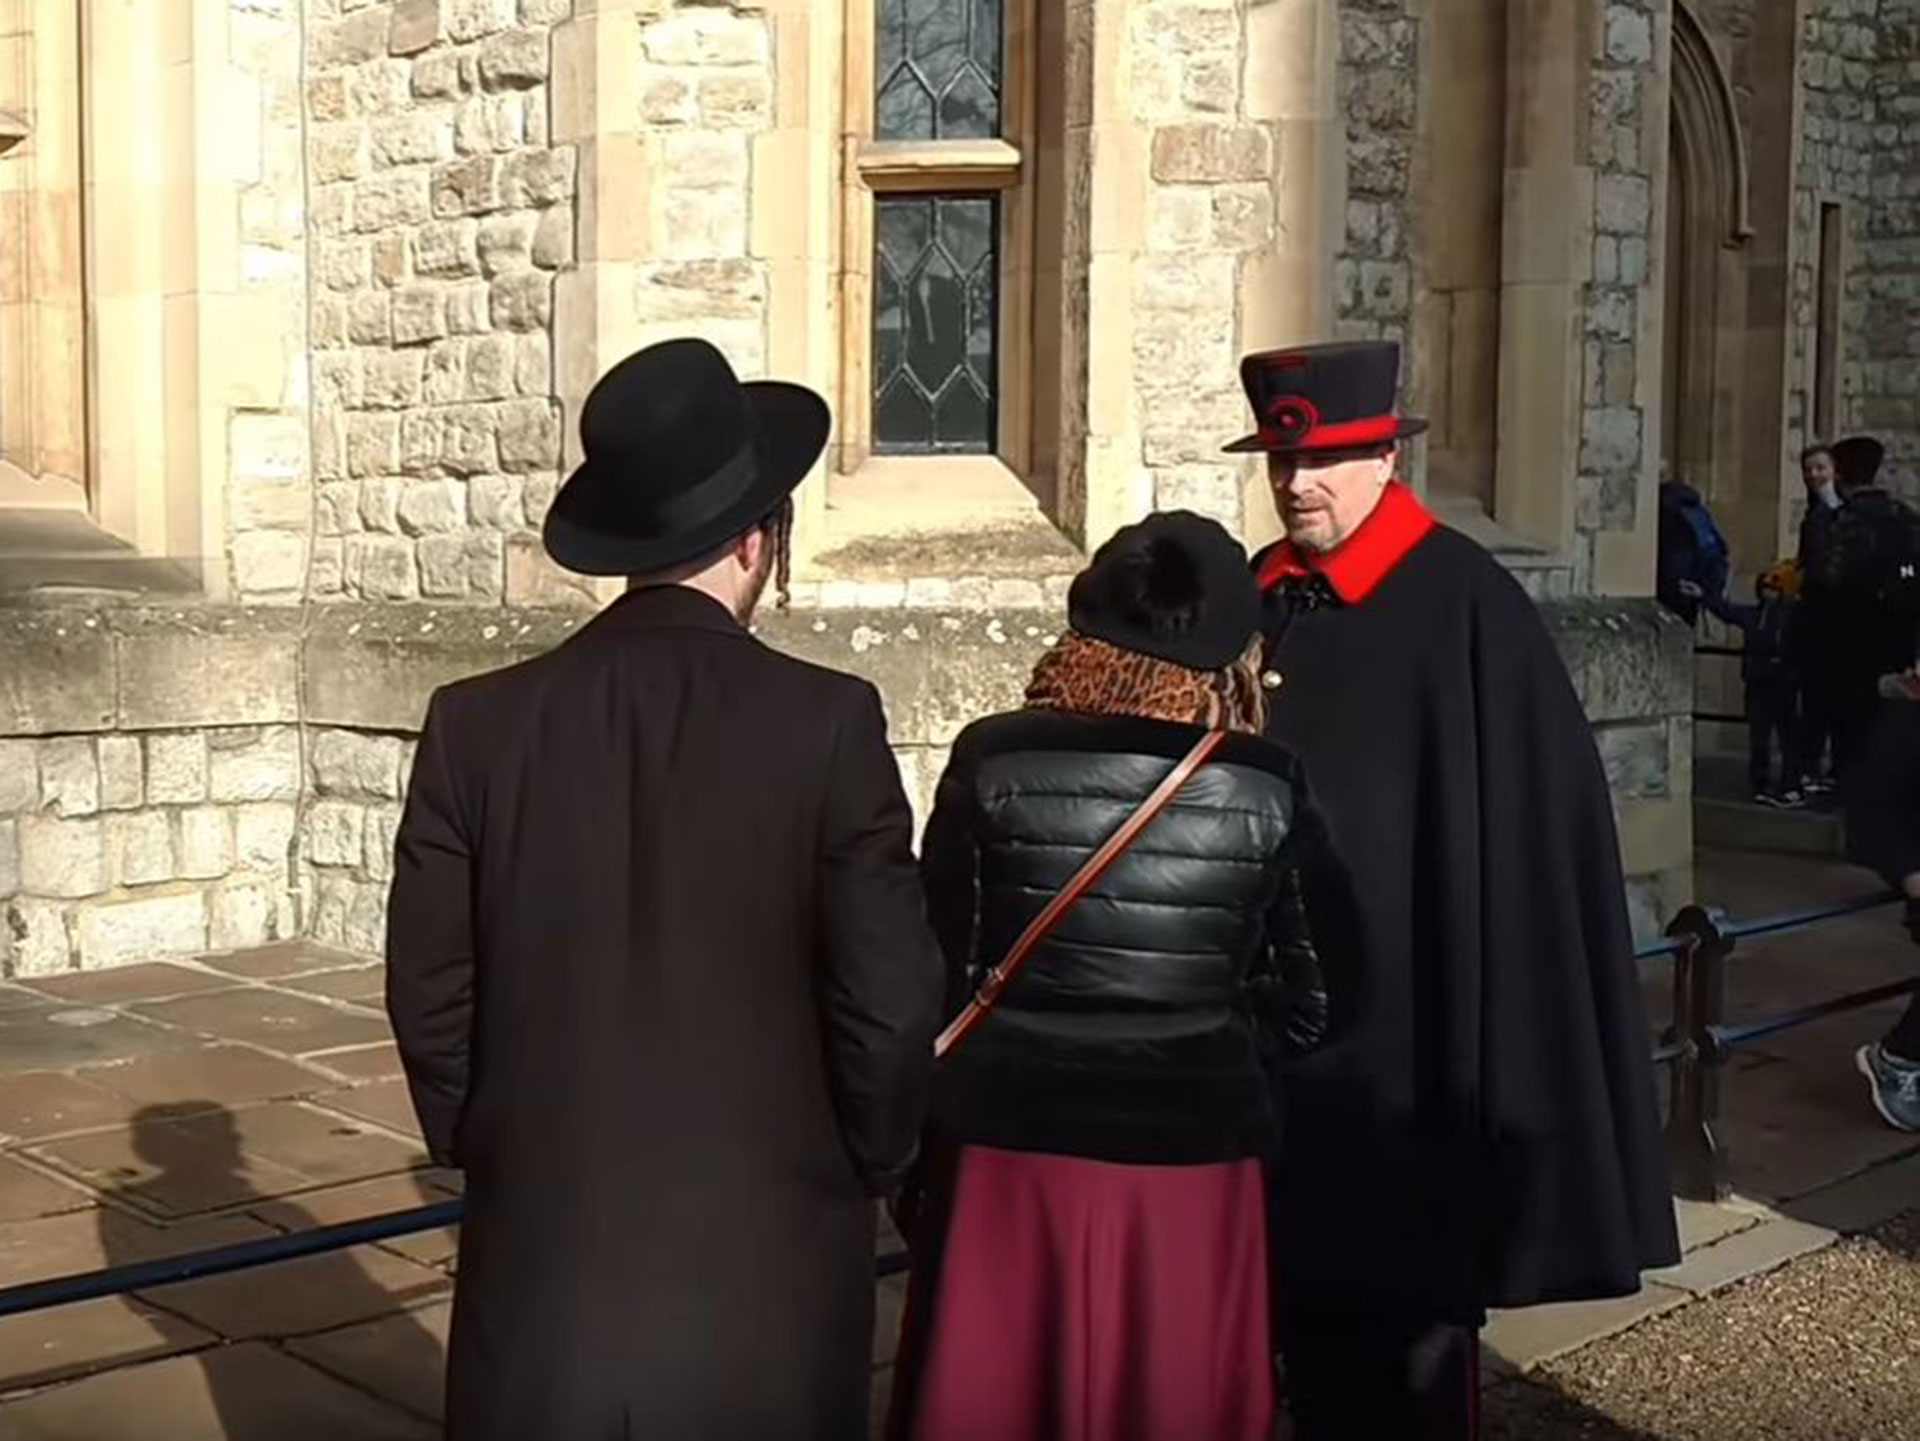 Tourist throws glove at Queen’s guard at Tower of London